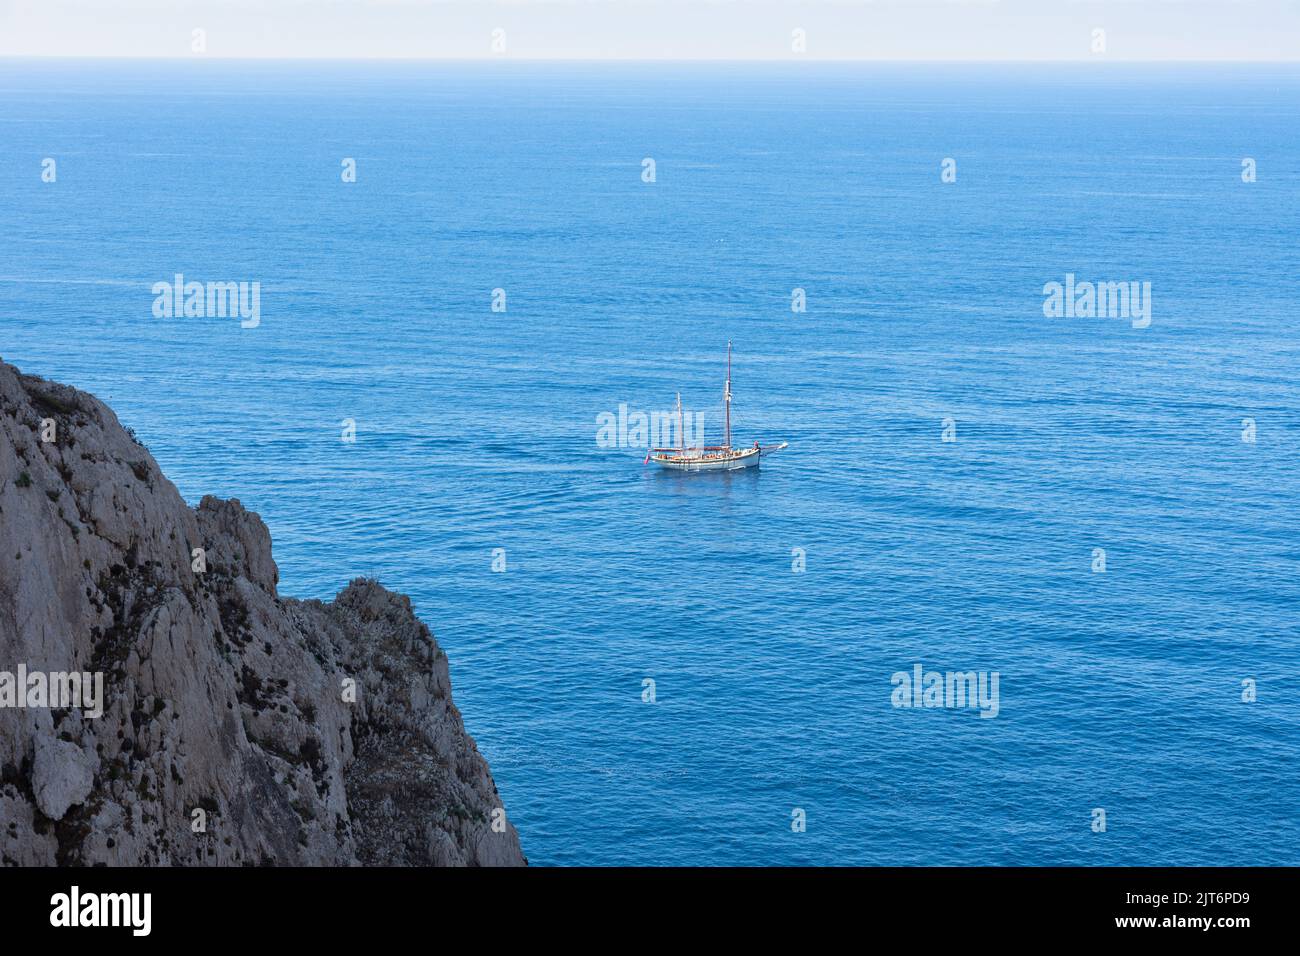 Horizontal view from a sailboat gorge with a turquoise Mediterranean Sea and blue sky on the horizon. Stock Photo